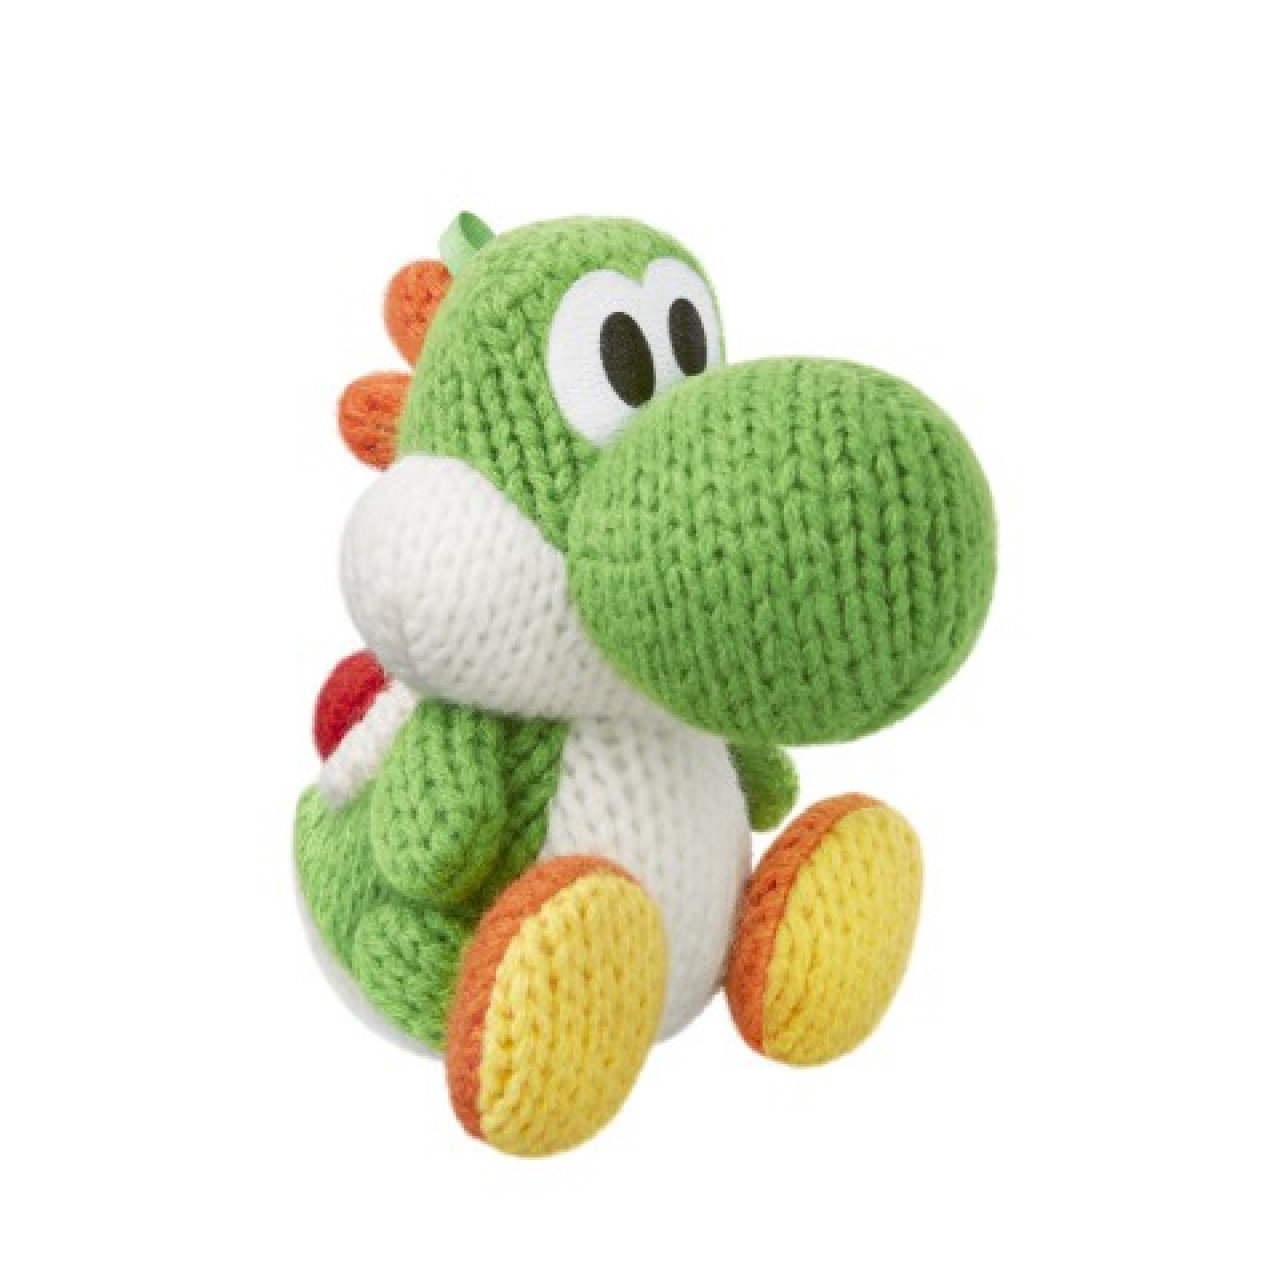 yoshi-s-wooly-world-launching-on-wii-u-this-friday-media-screenshots-dlh-net-the-gaming-people